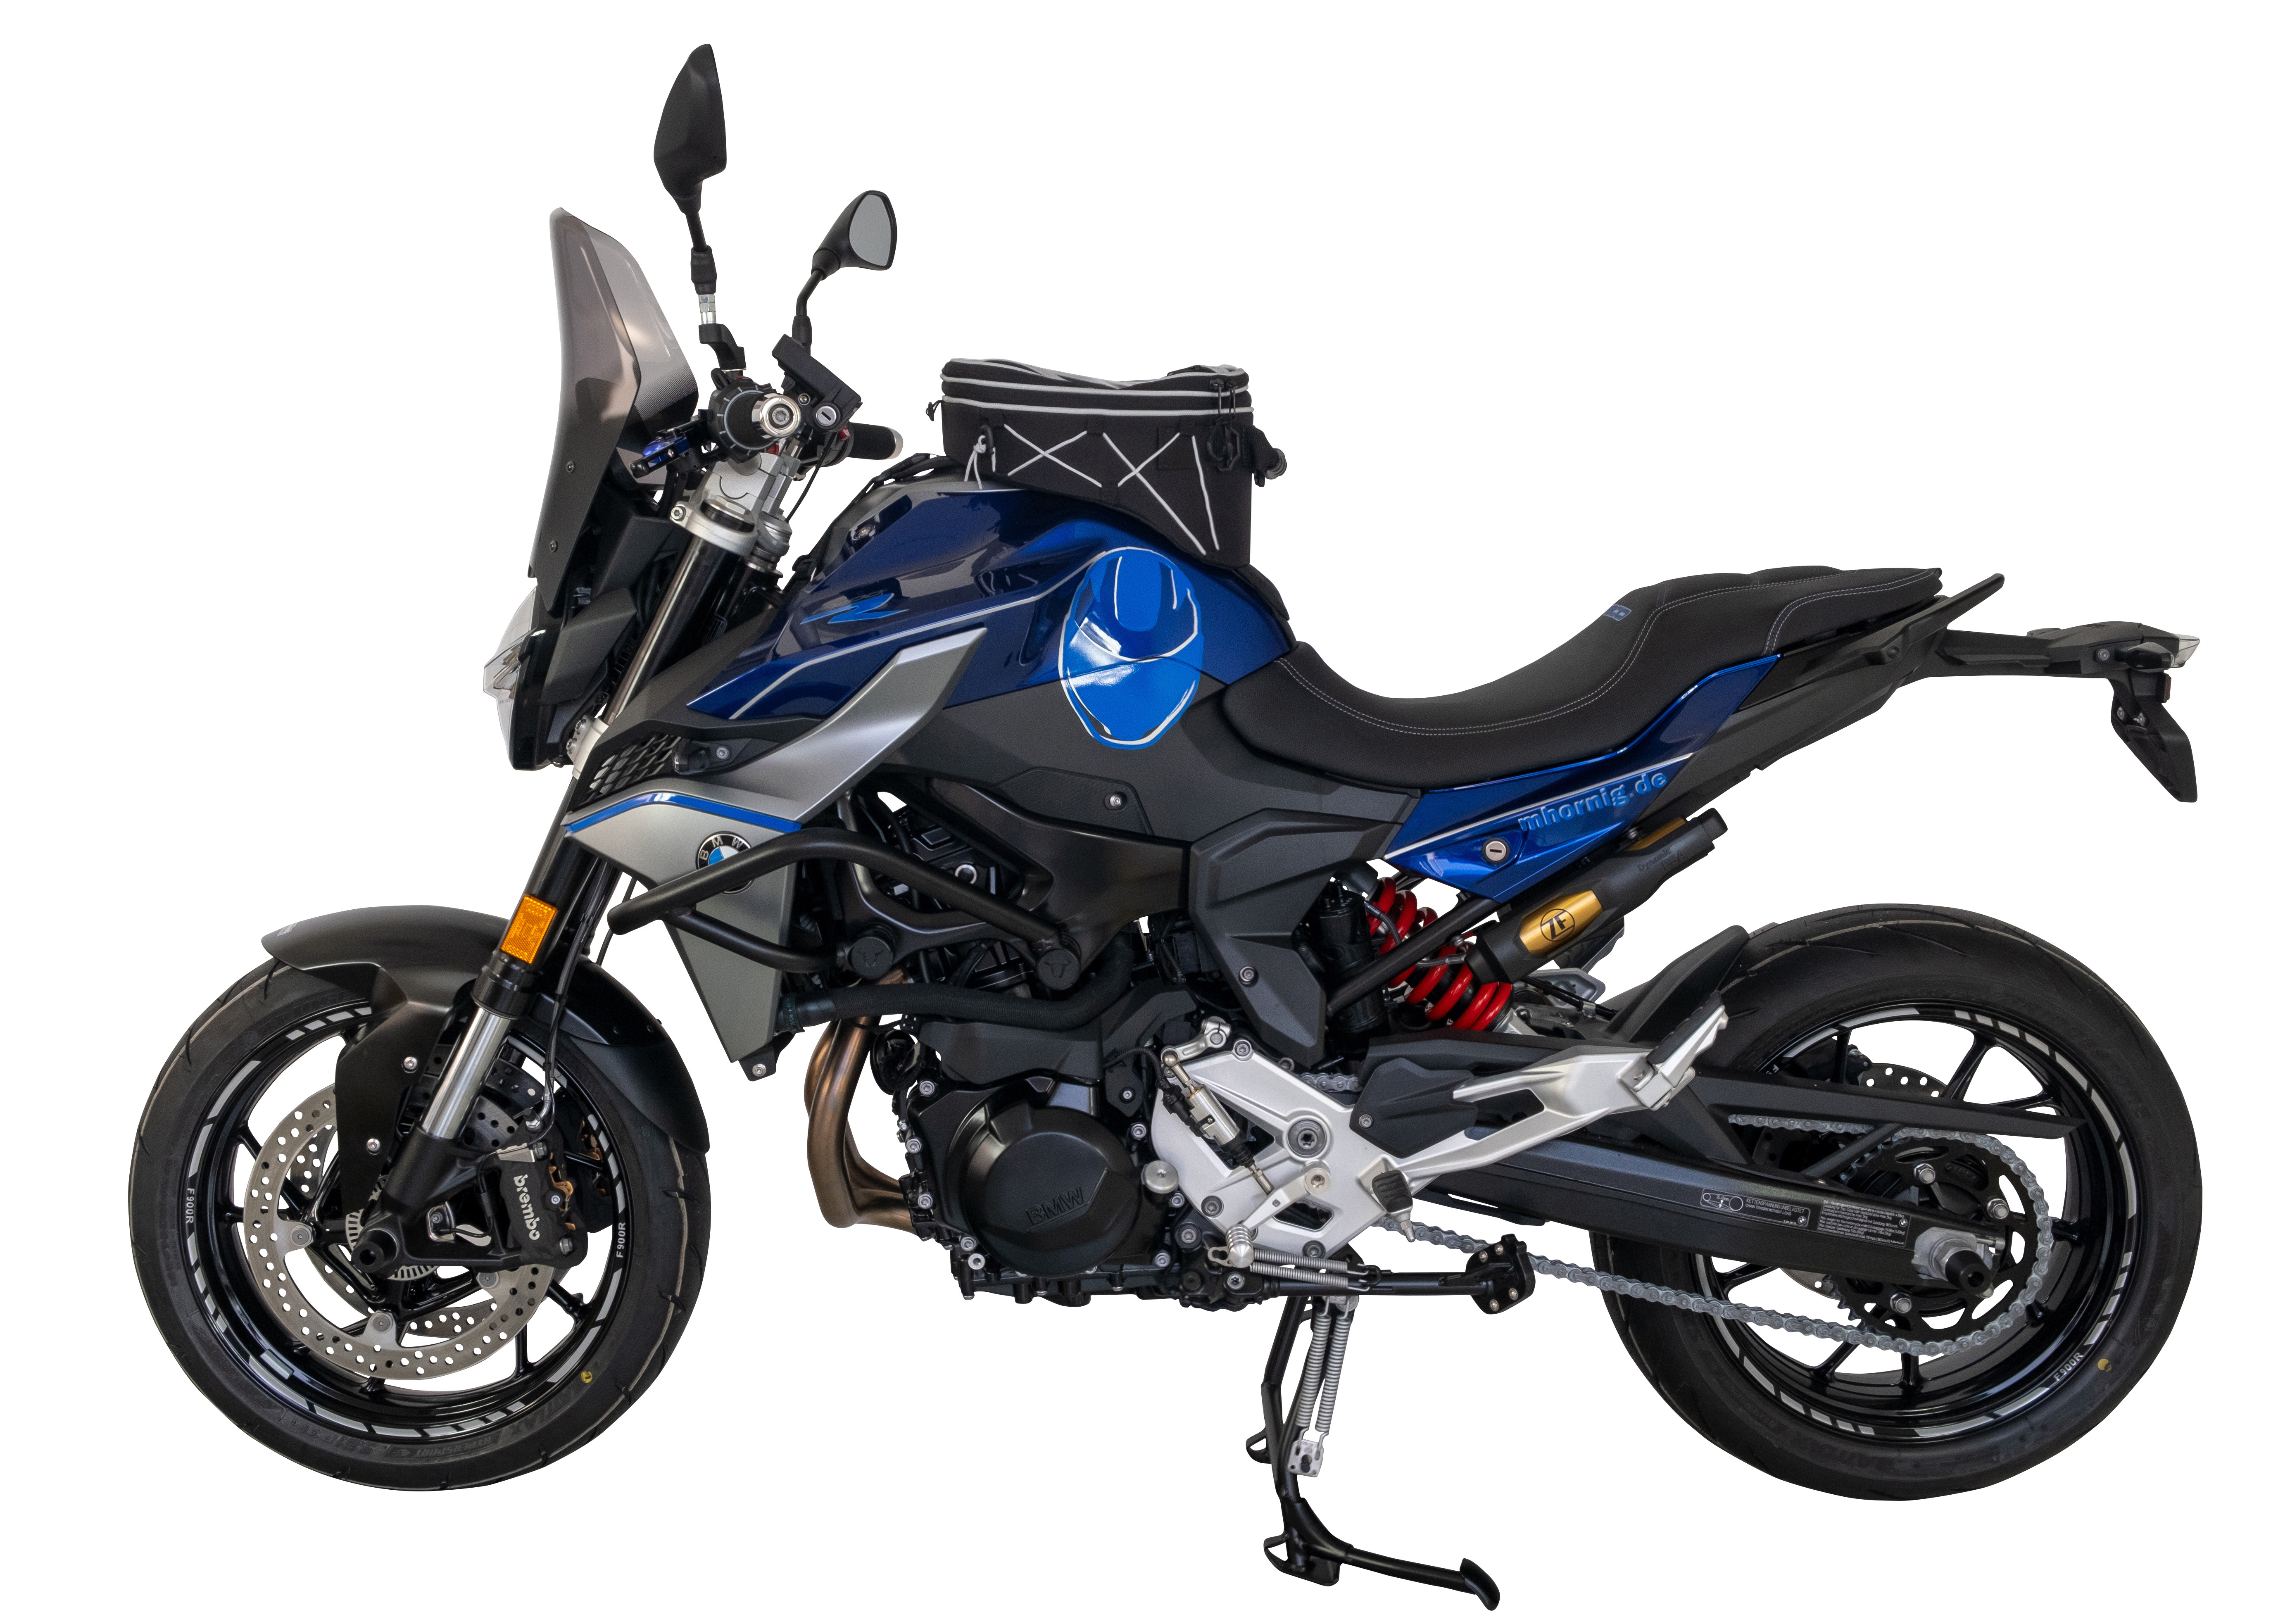 Touring windshield for BMW F900R